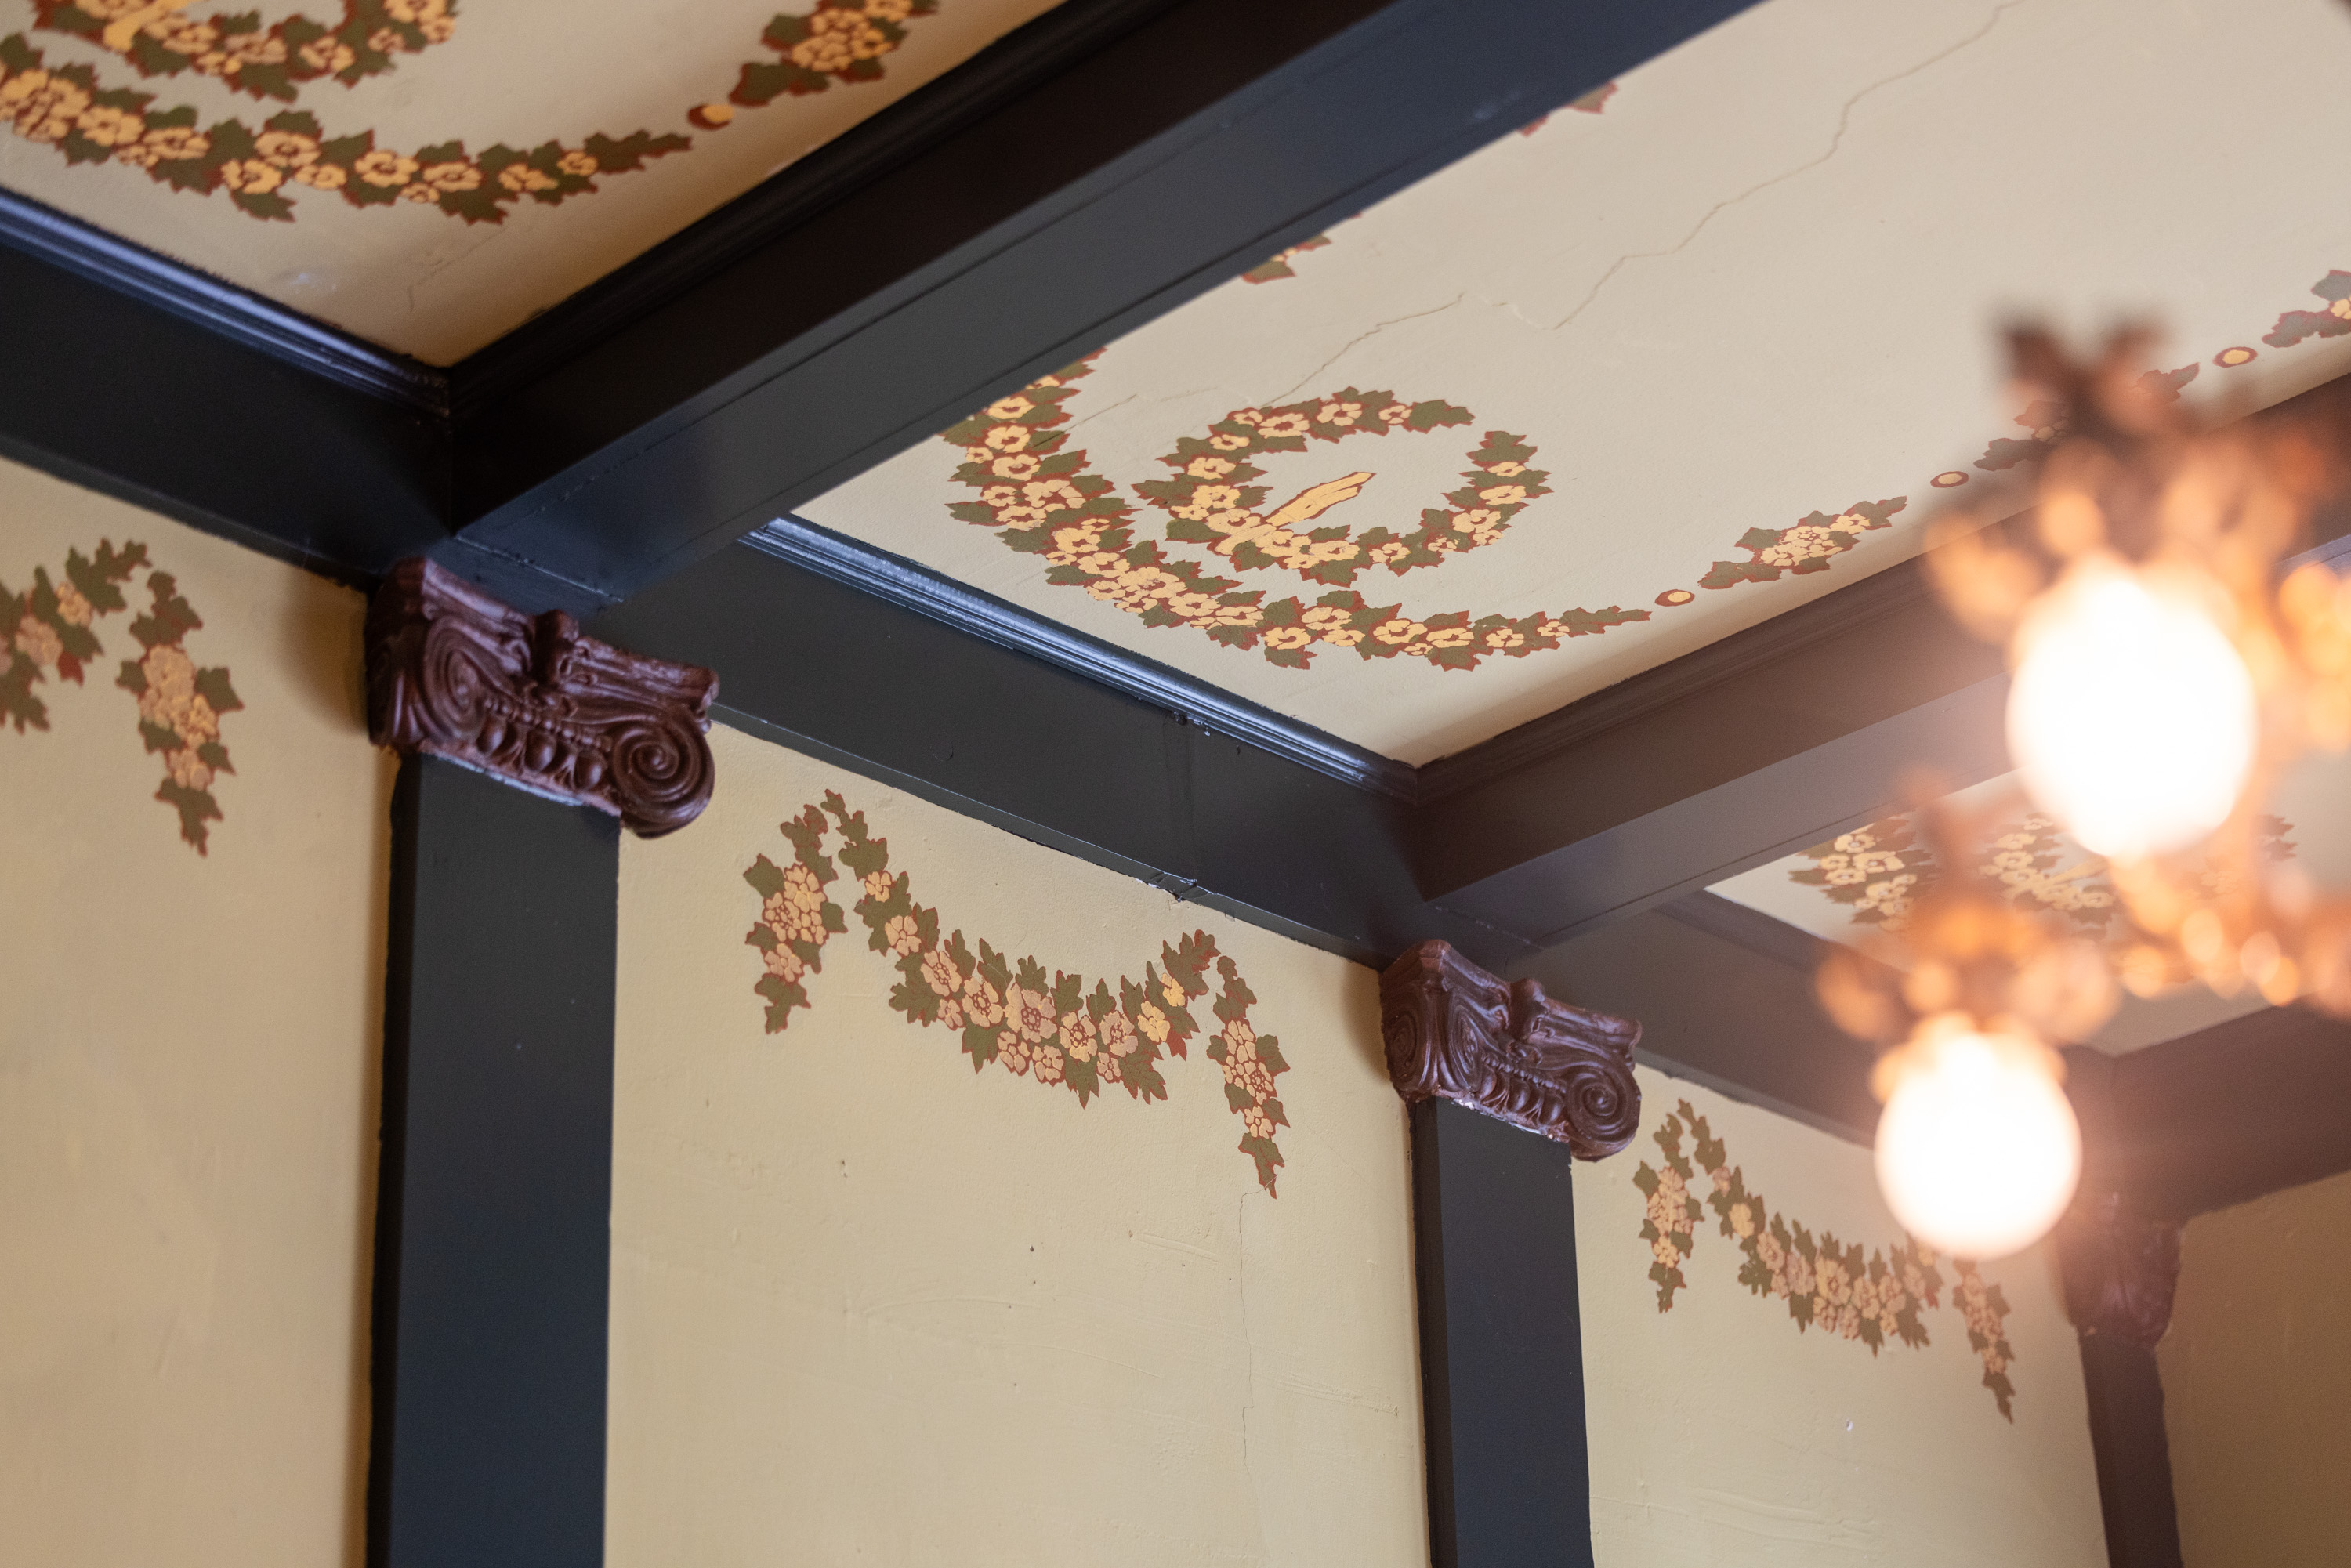 The image shows a room corner with decorative floral paintings on the walls and ceiling, dark wooden beams, ornate corner brackets, and a partially visible chandelier.